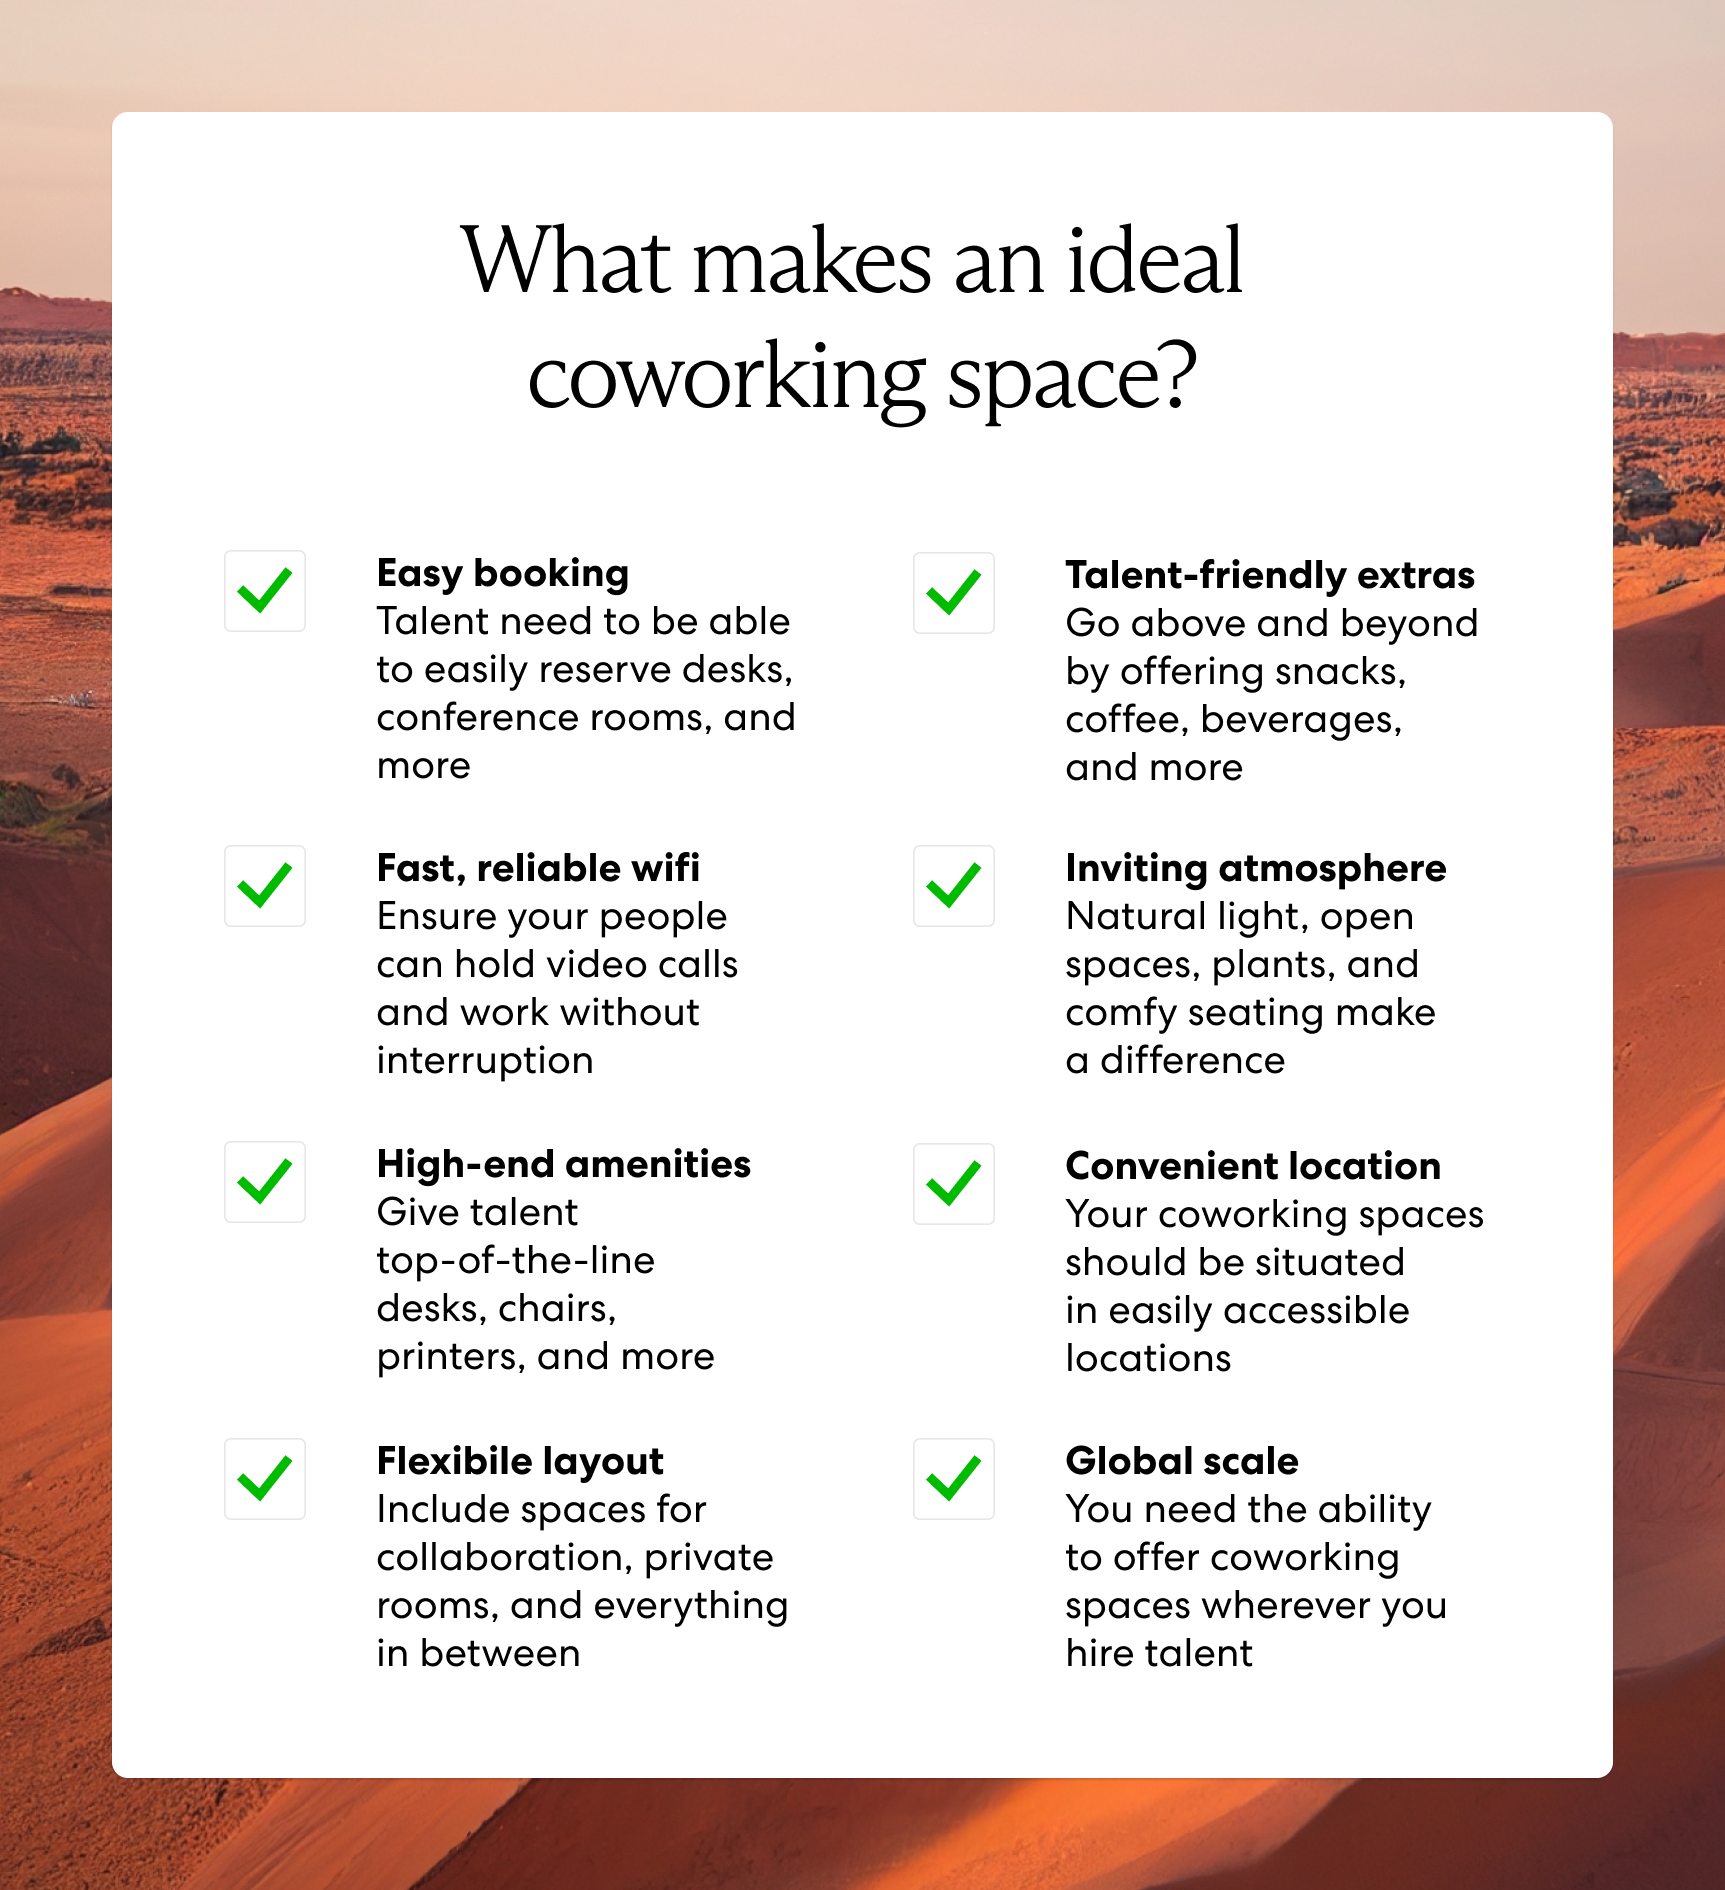 What makes an ideal coworking space?